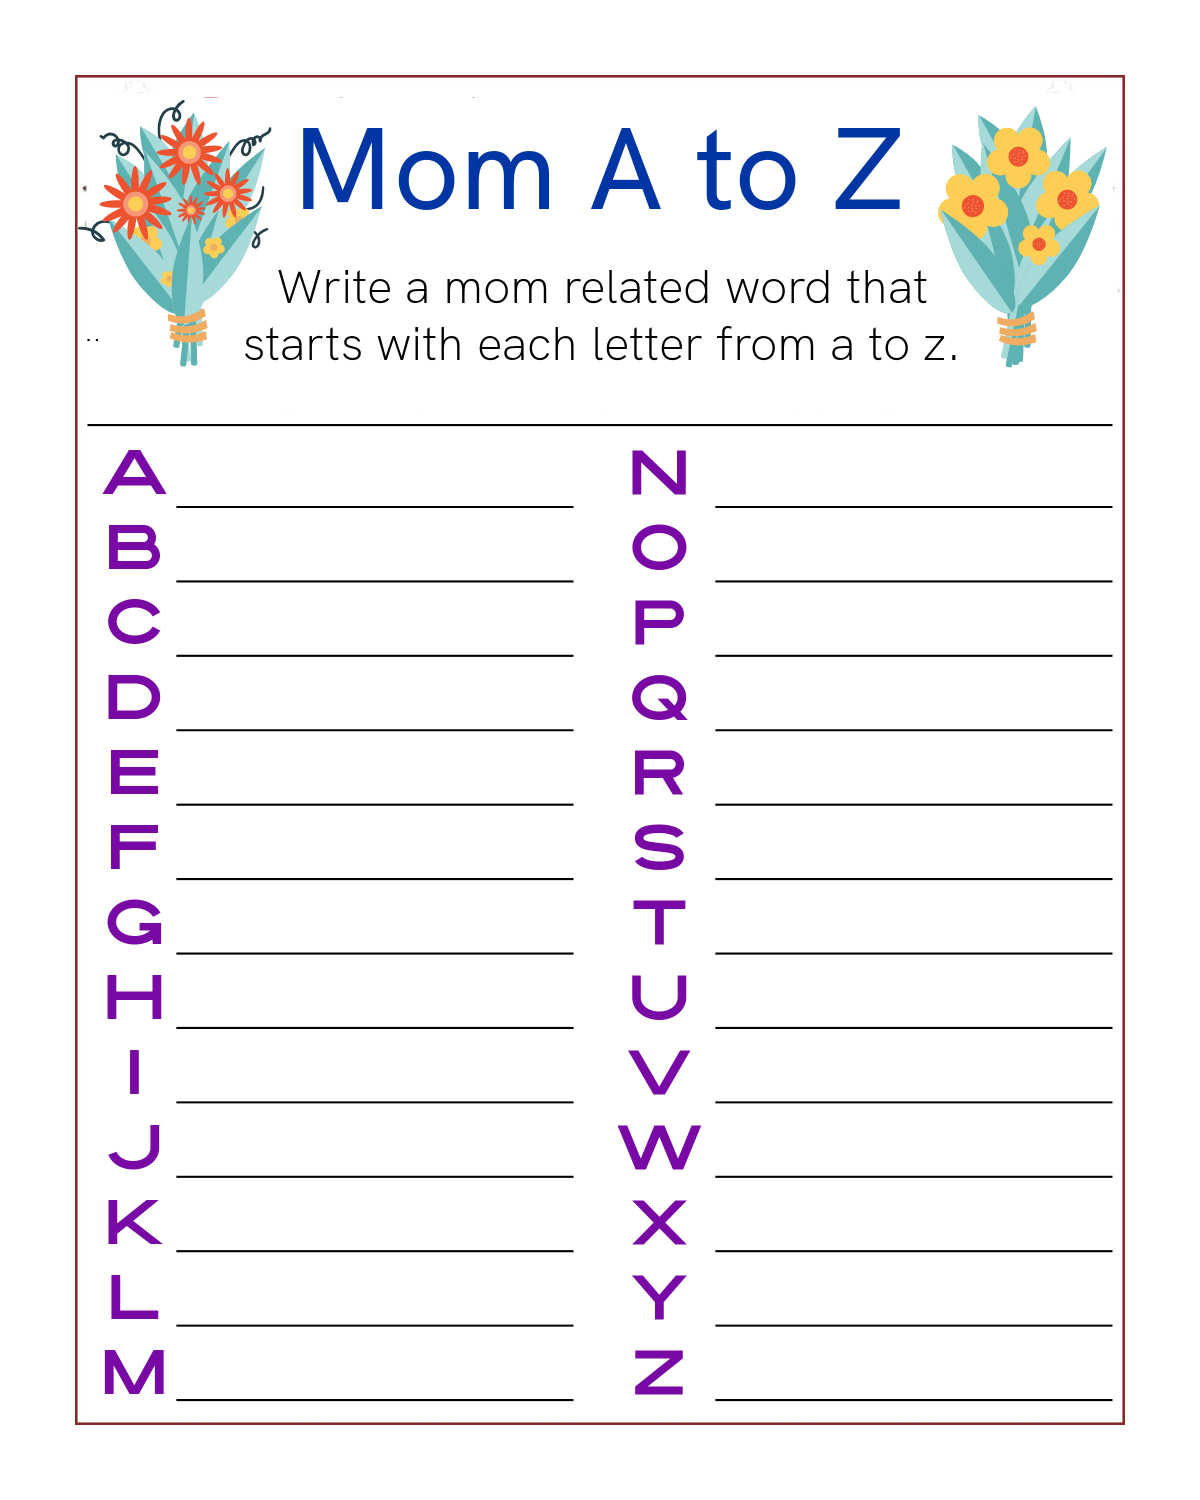 mom a to z word activity page